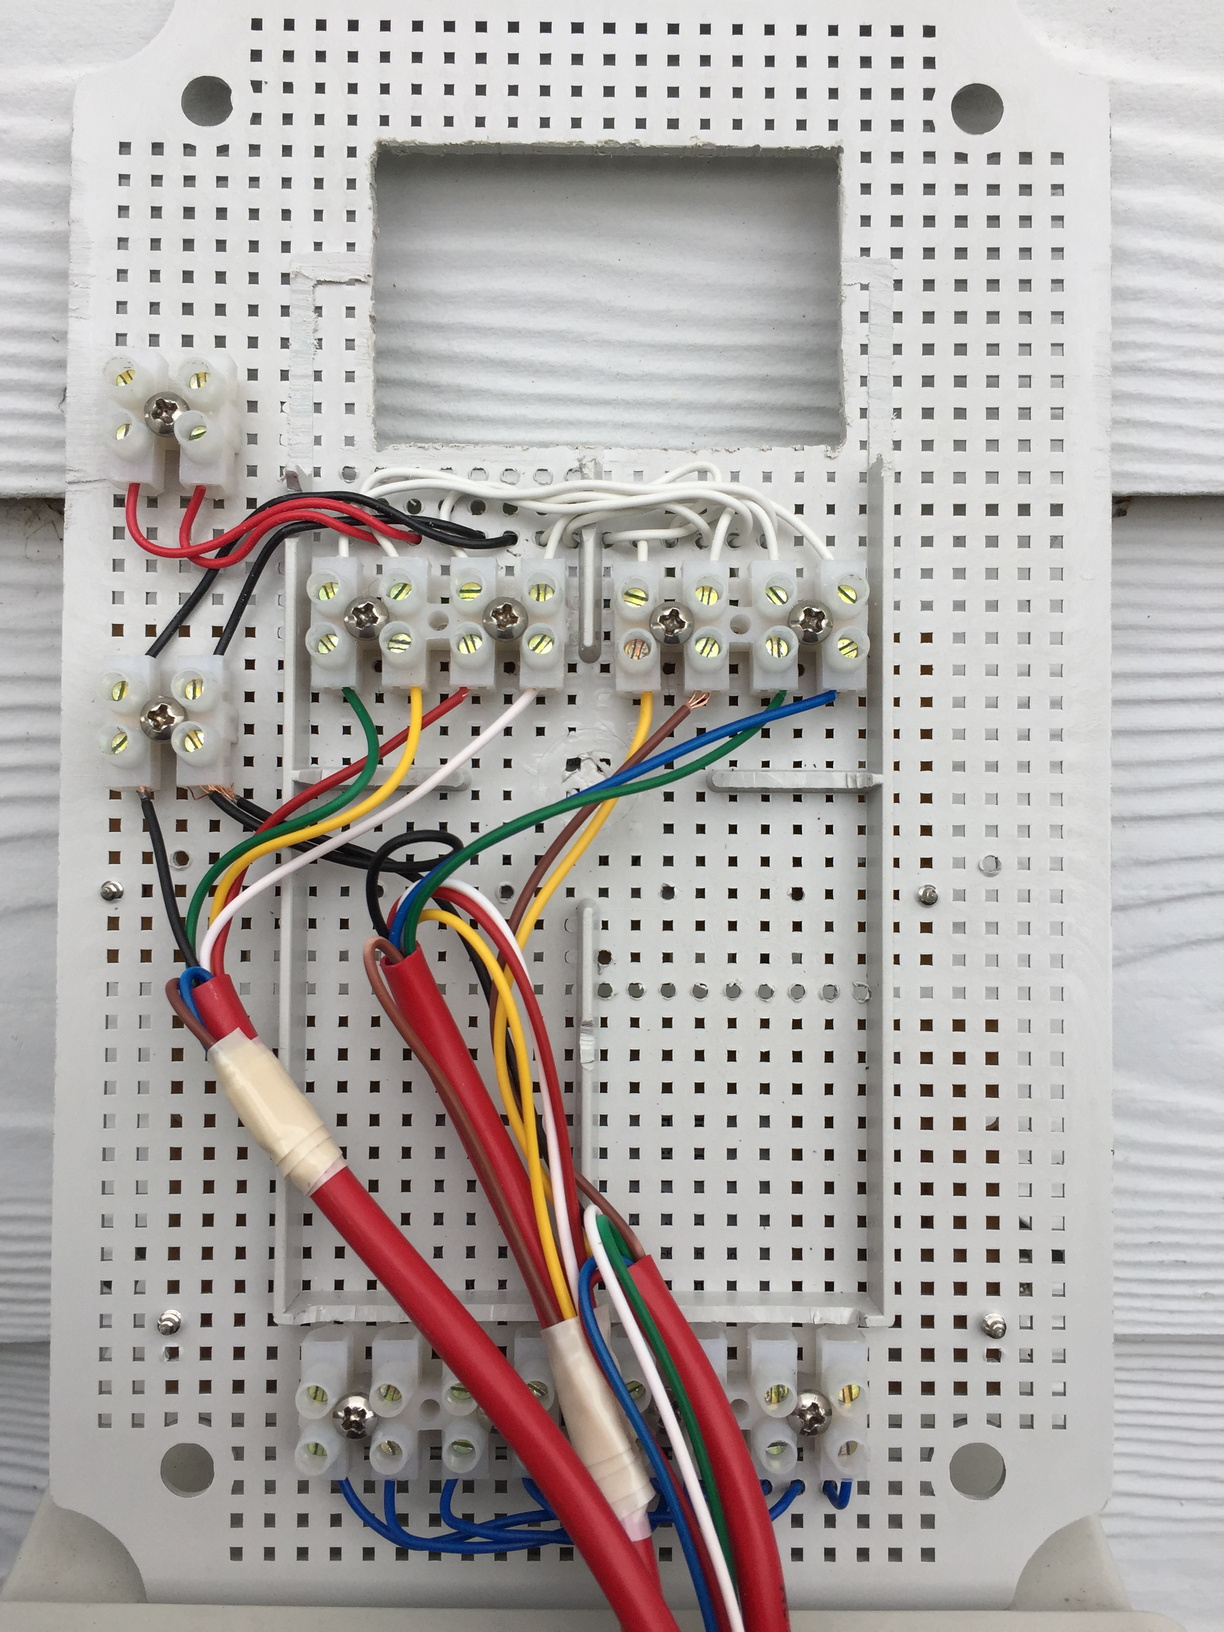 Close-up of the wiring into the terminal strips. I'm glad I had this picture to refer to, as I promptly forgot which colour wire was connected to which zone and didn't know what solenoid to connect to which coloured wire!